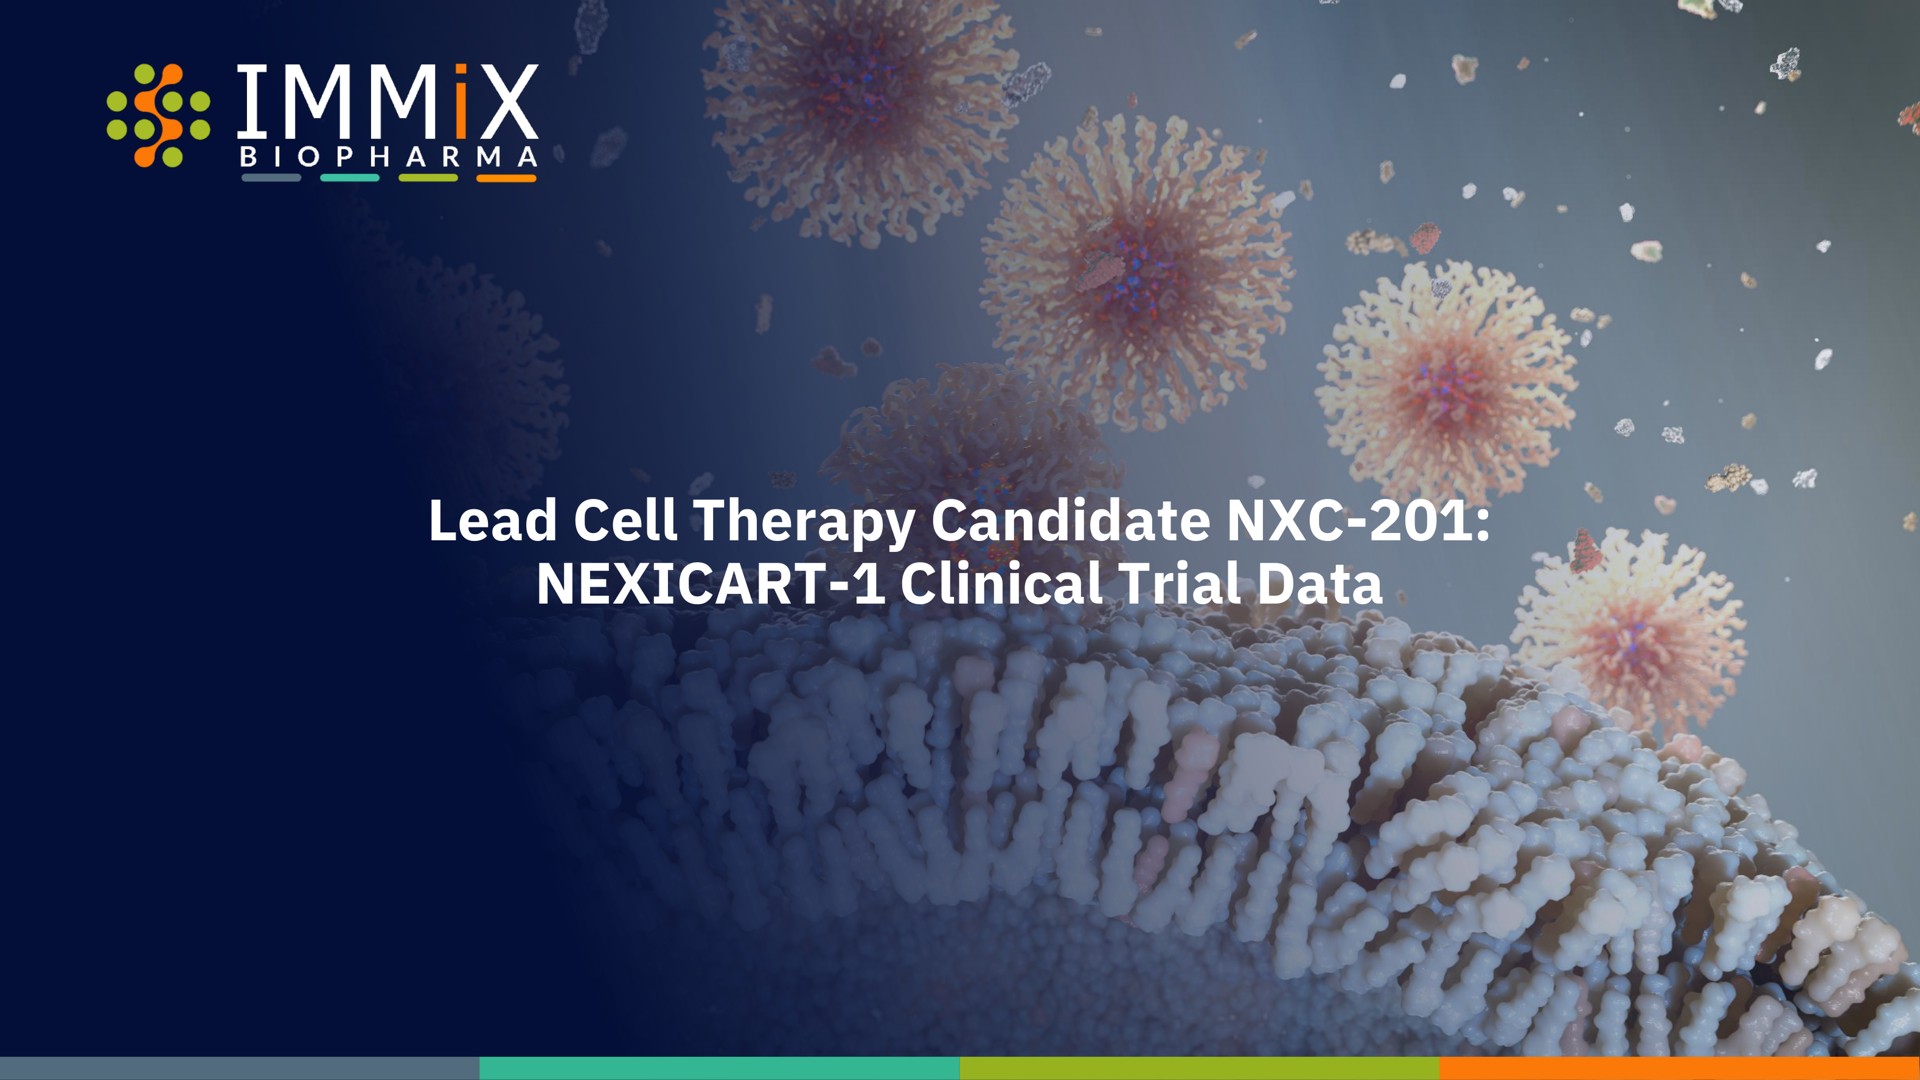 lead cell therapy candidate clinical trial data coe | Immix Biopharma